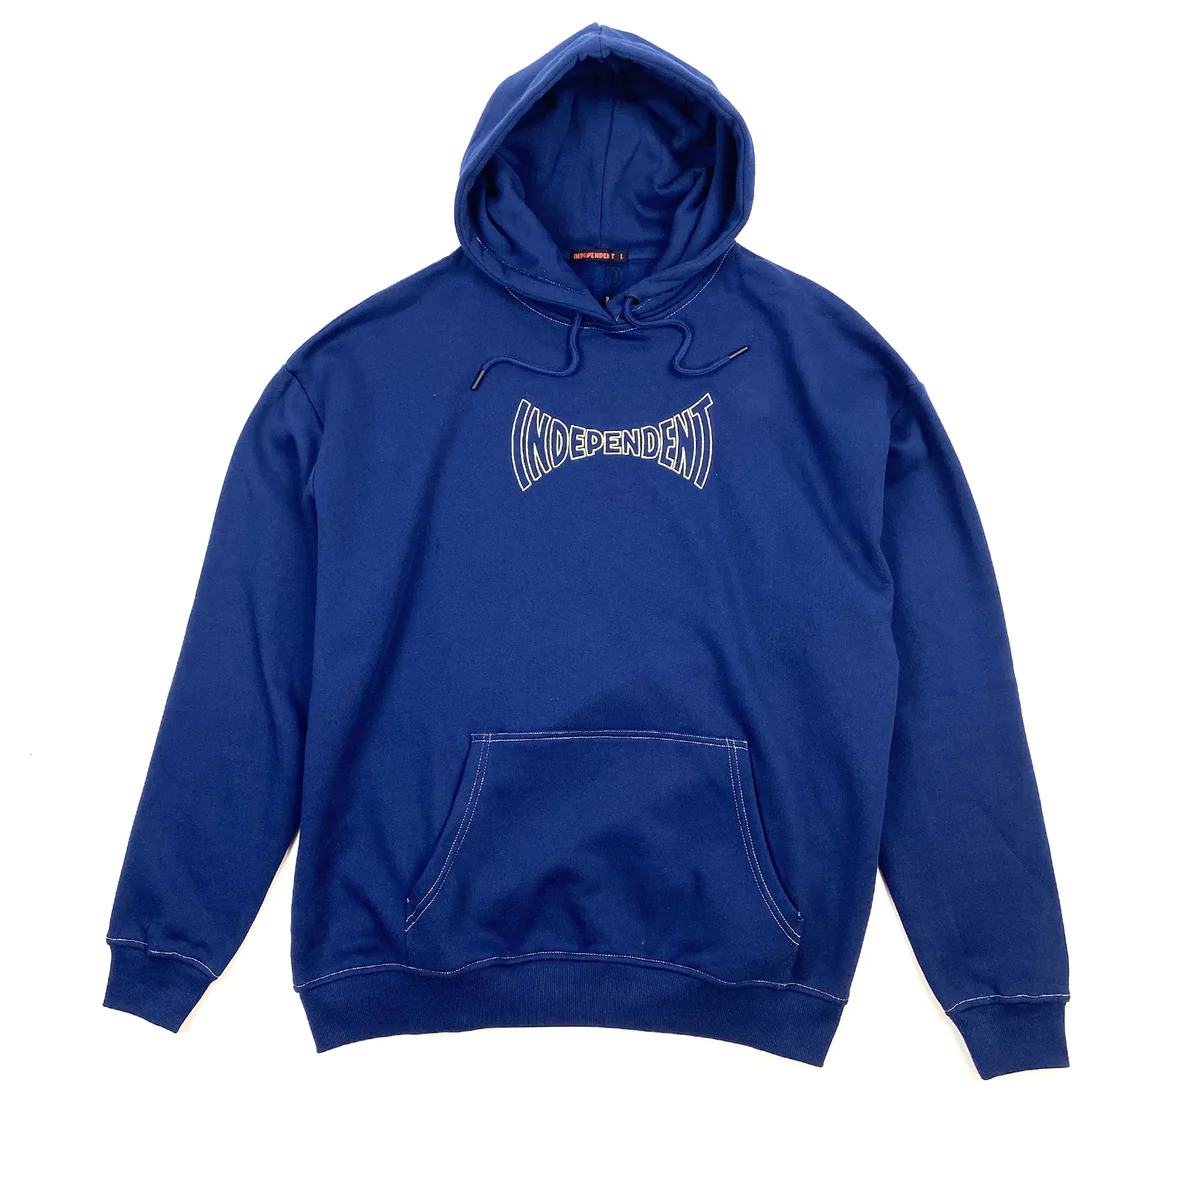 Independent Jumper Spanning Contrast Hoody Navy